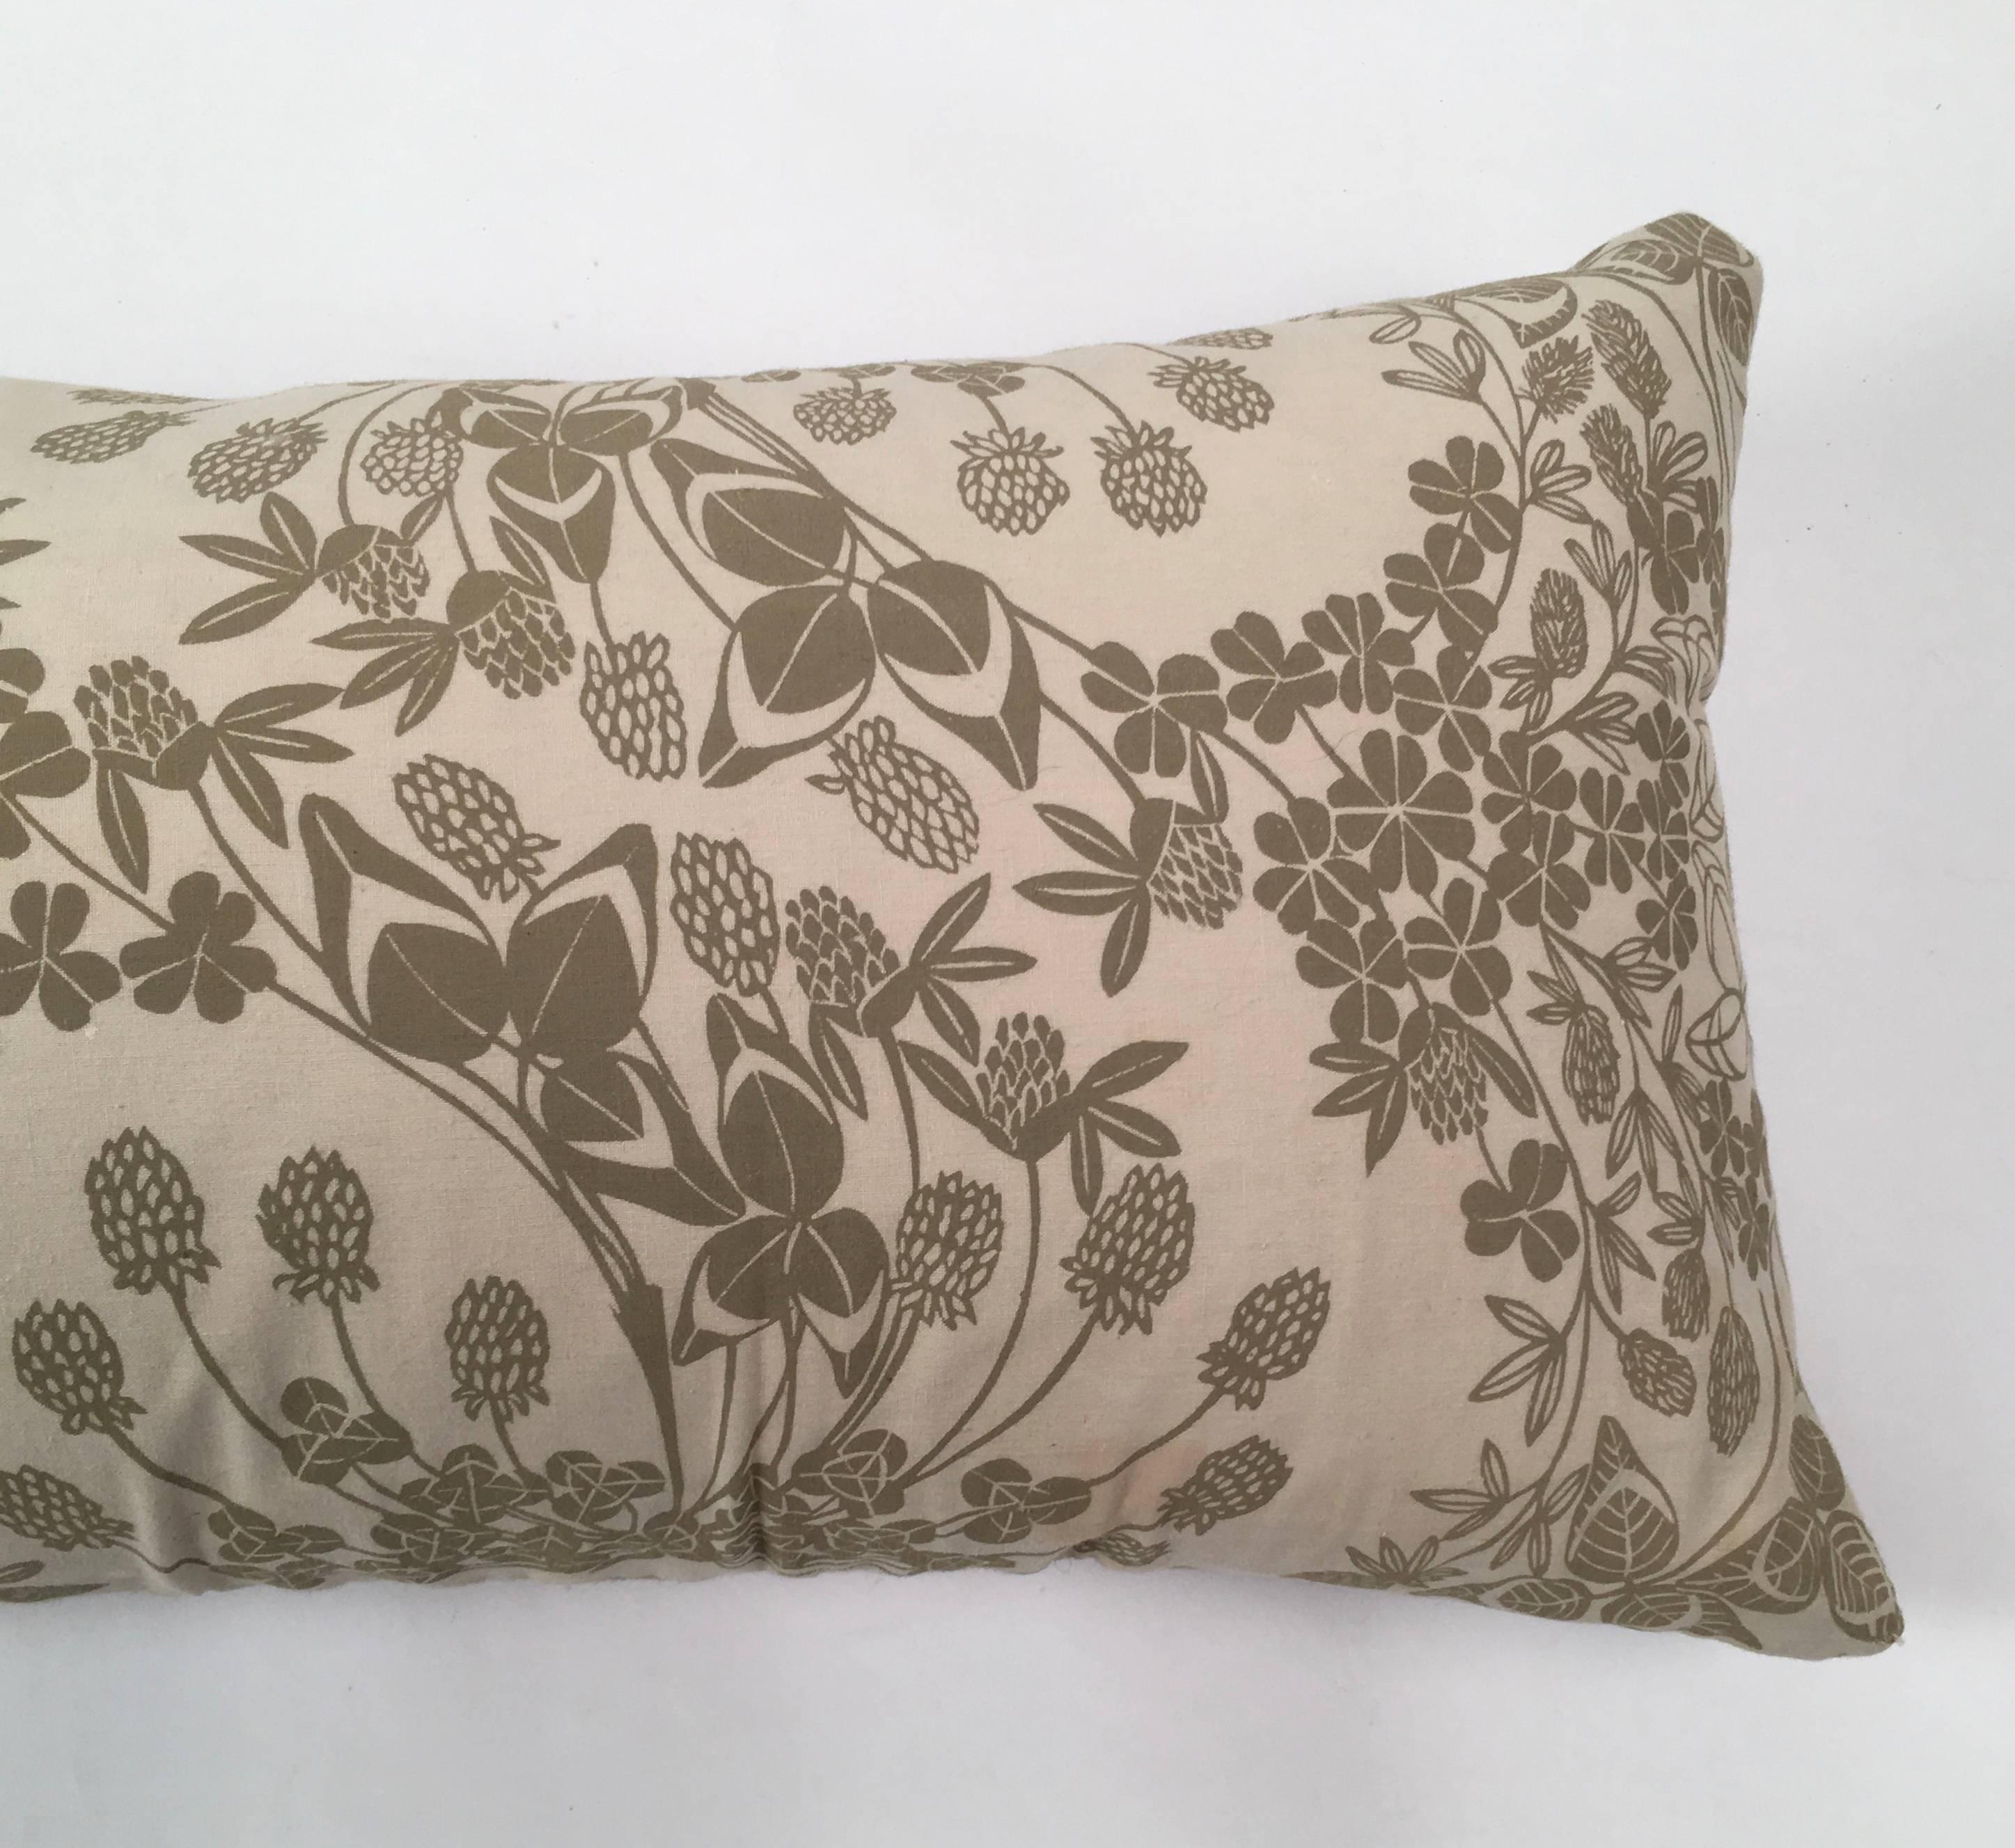 Mid-20th Century Folly Cove Designers Hand Block Printed Clover Pillow